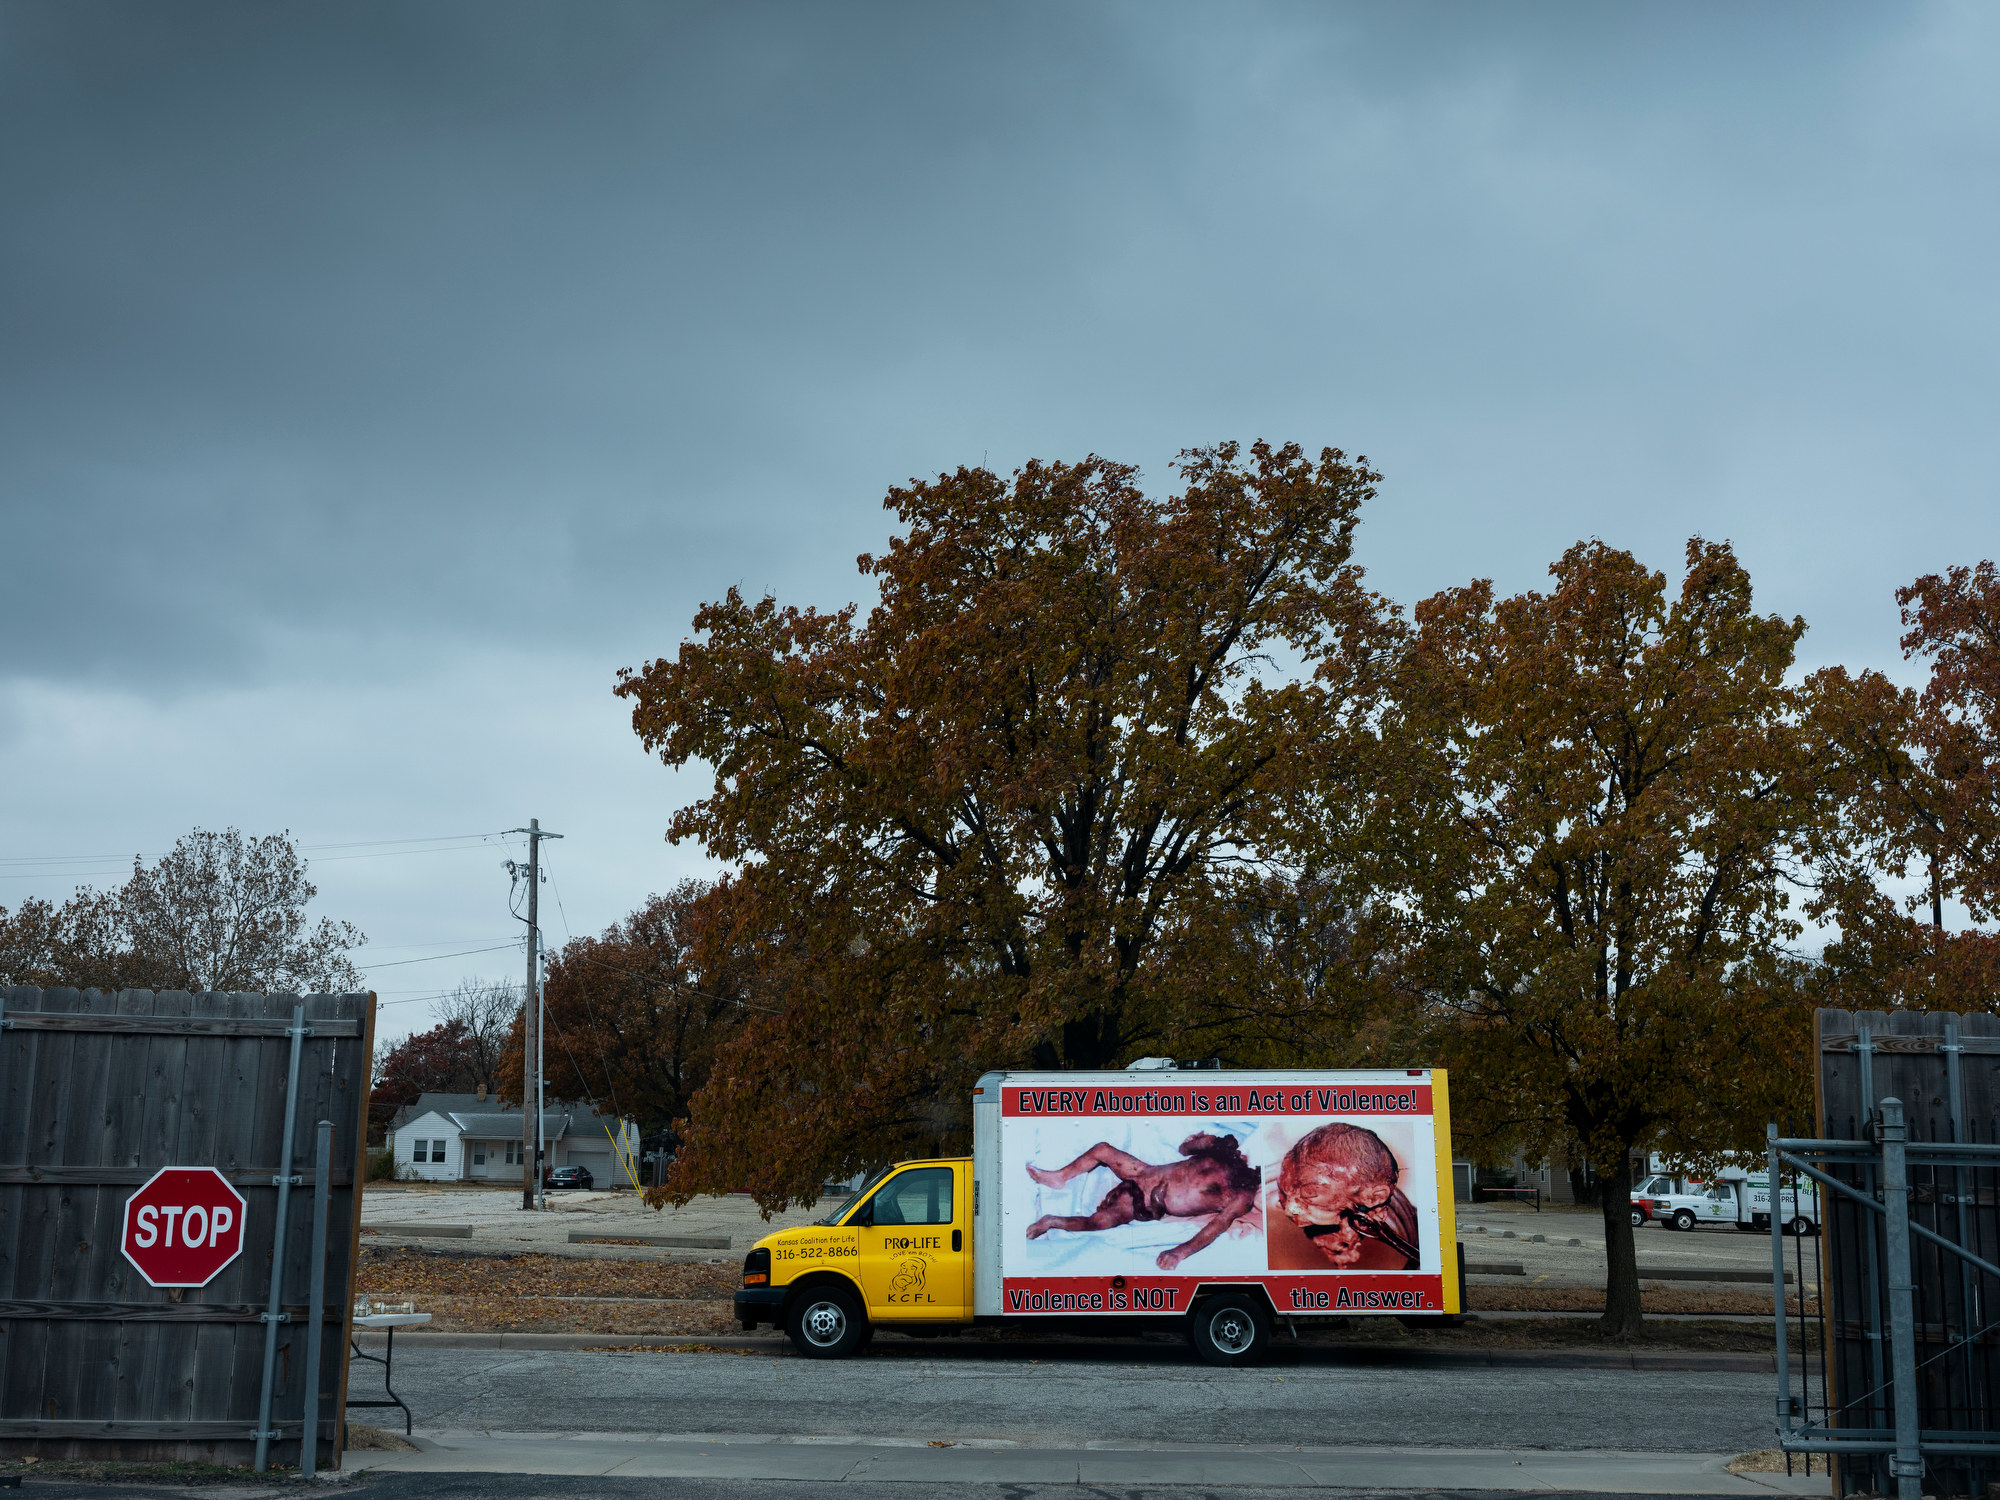 A truck with a large, graphic and misleading image of a nearly full term fetus with a sign saying every abortion is an act of violence sits on a street